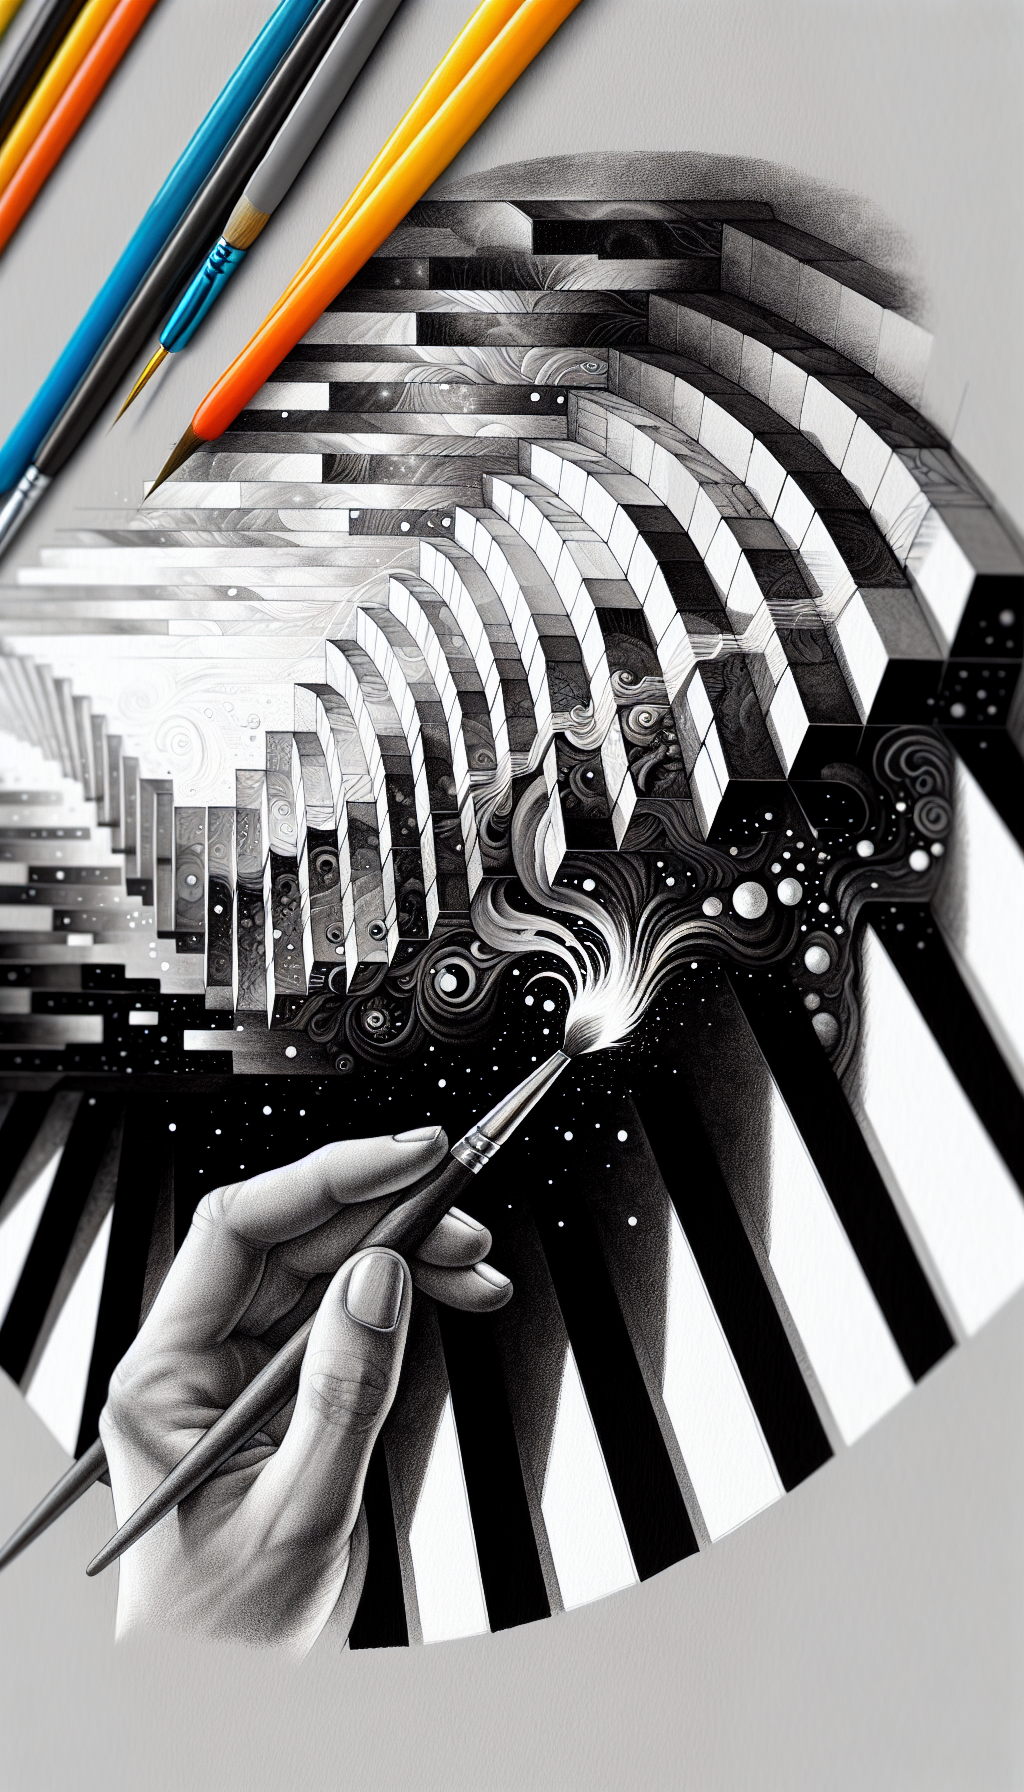 An illustration depicting an artist's hand holding a brush, painting a grayscale stairway that ascends from deep black to pristine white, each step demonstrating a higher value contrast. As the stairs rise, they transition into a vibrant, colorful spectrum, showing the enhancement in artwork depth, with half the image rendered in photorealistic style and the other in bold, abstract shapes.